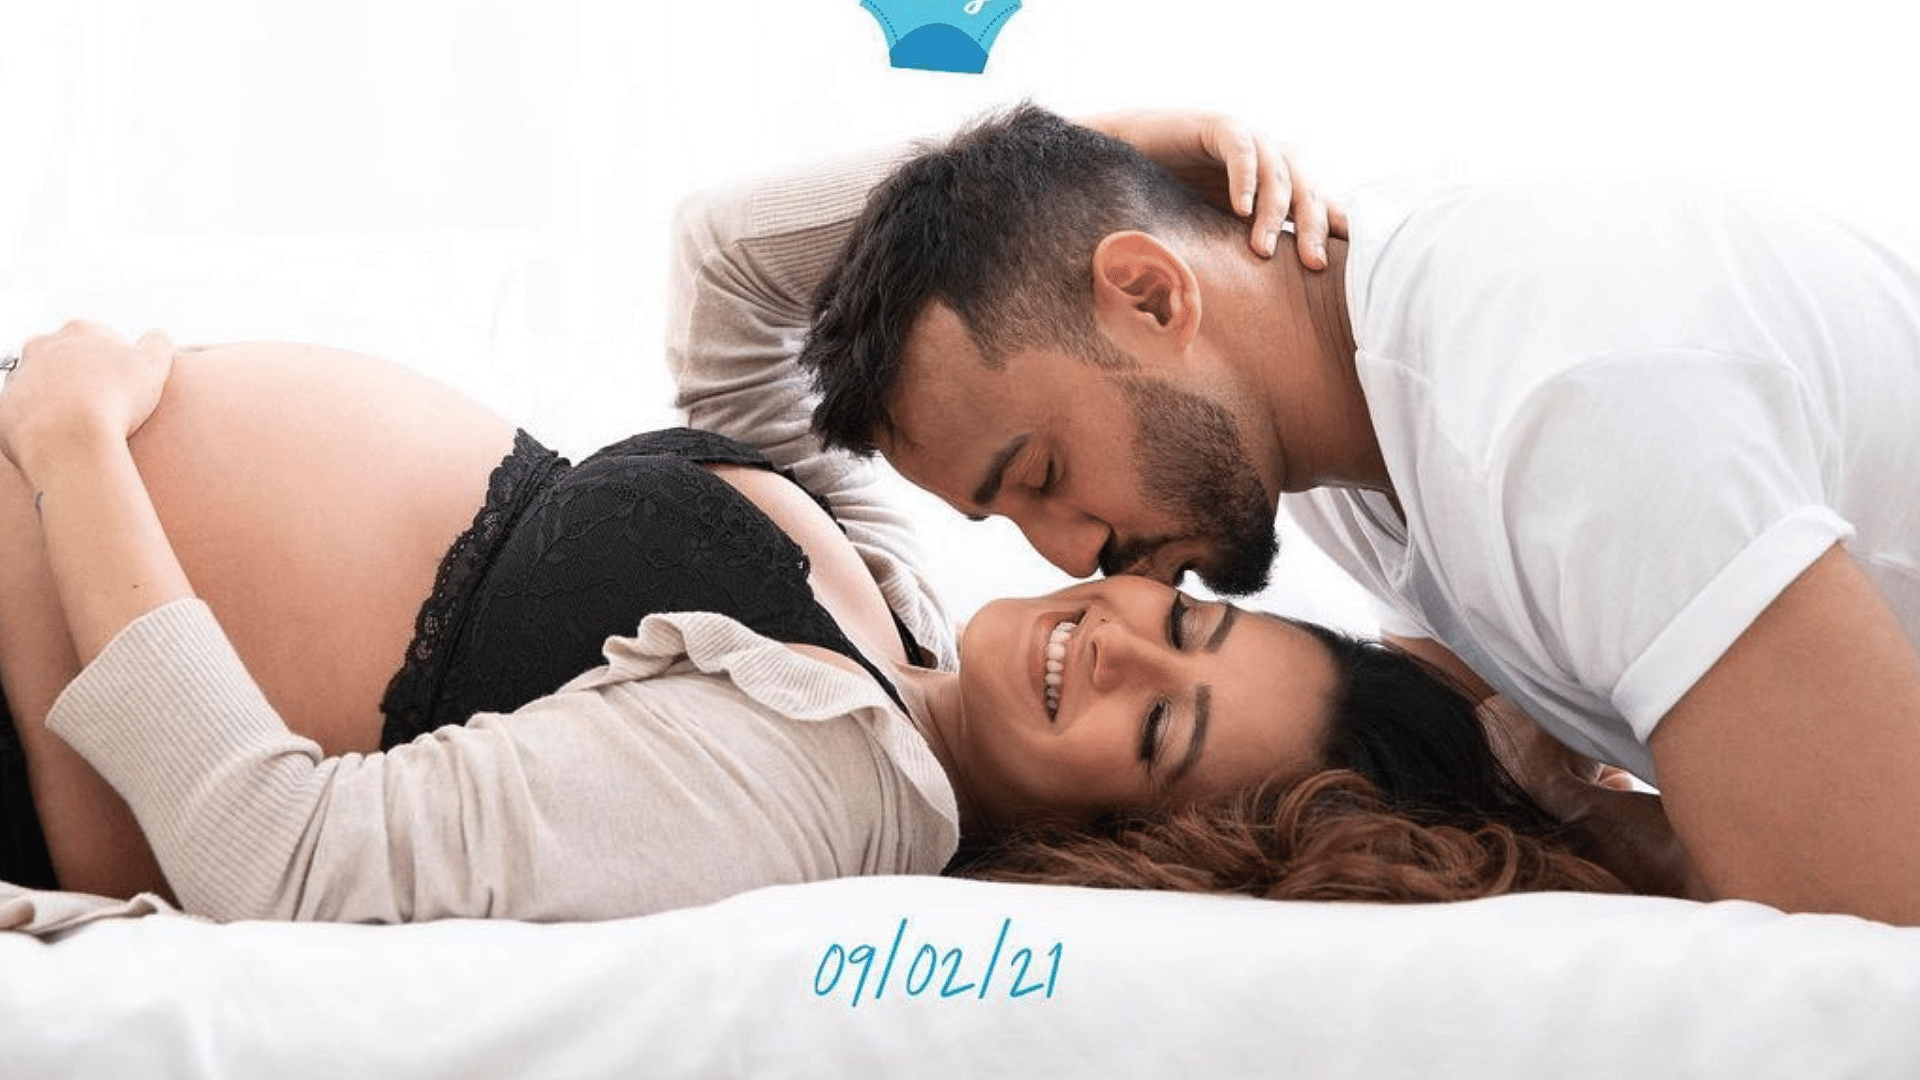 Anita Hassanandani and husband Rohit Reddy have welcomed their first child, a baby boy.